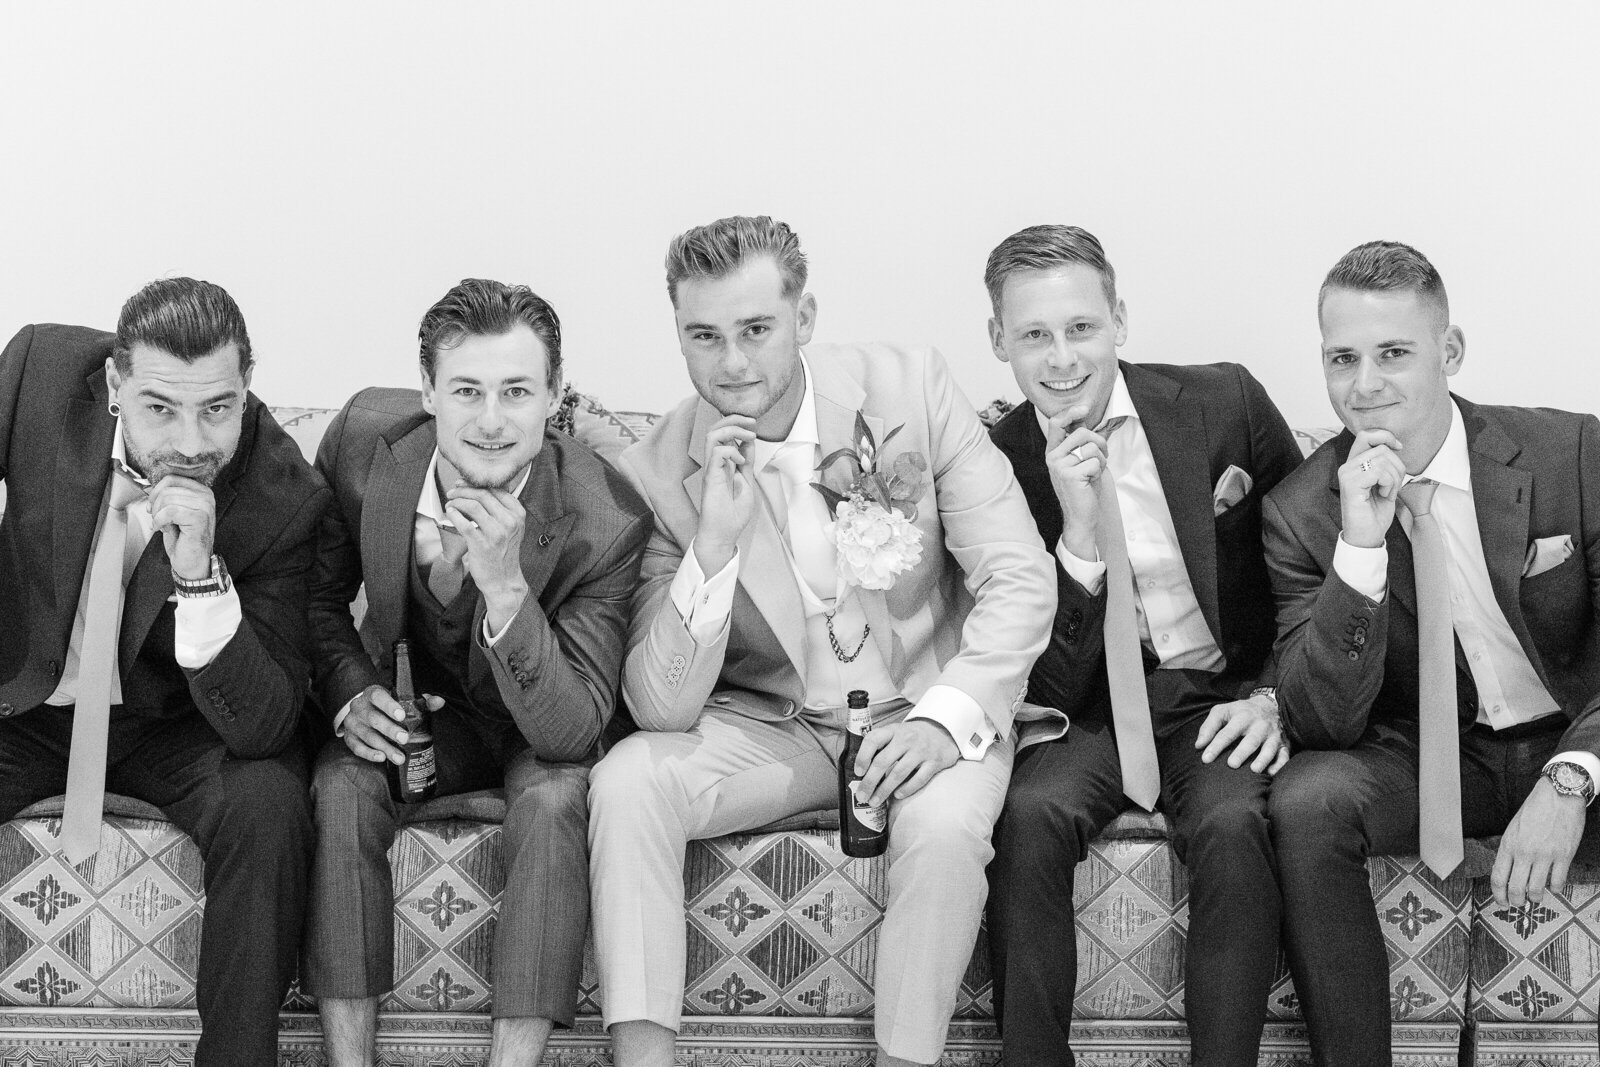 Groom Jochem and his groomsmen pose waiting for the ceremony to begin